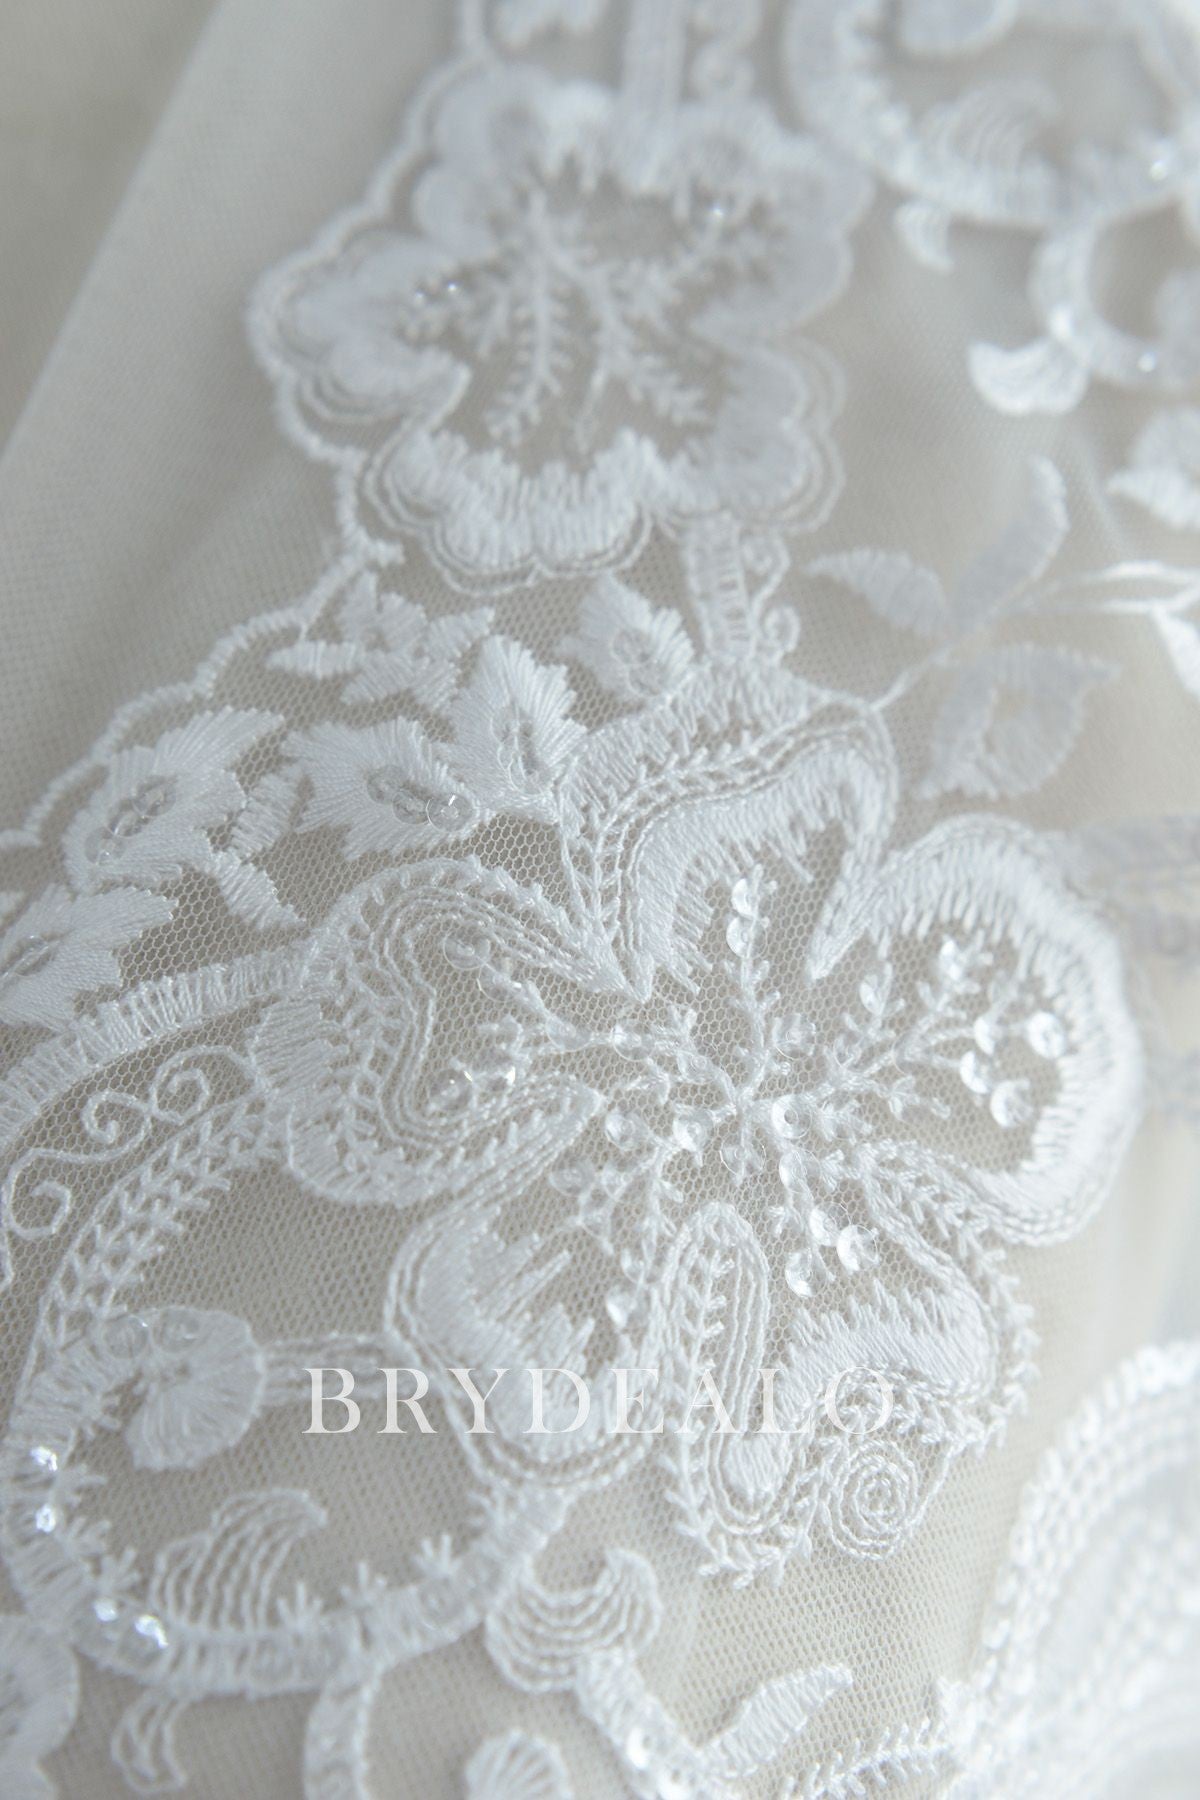 Best Beautiful Double Border Lace Fabric with Cording